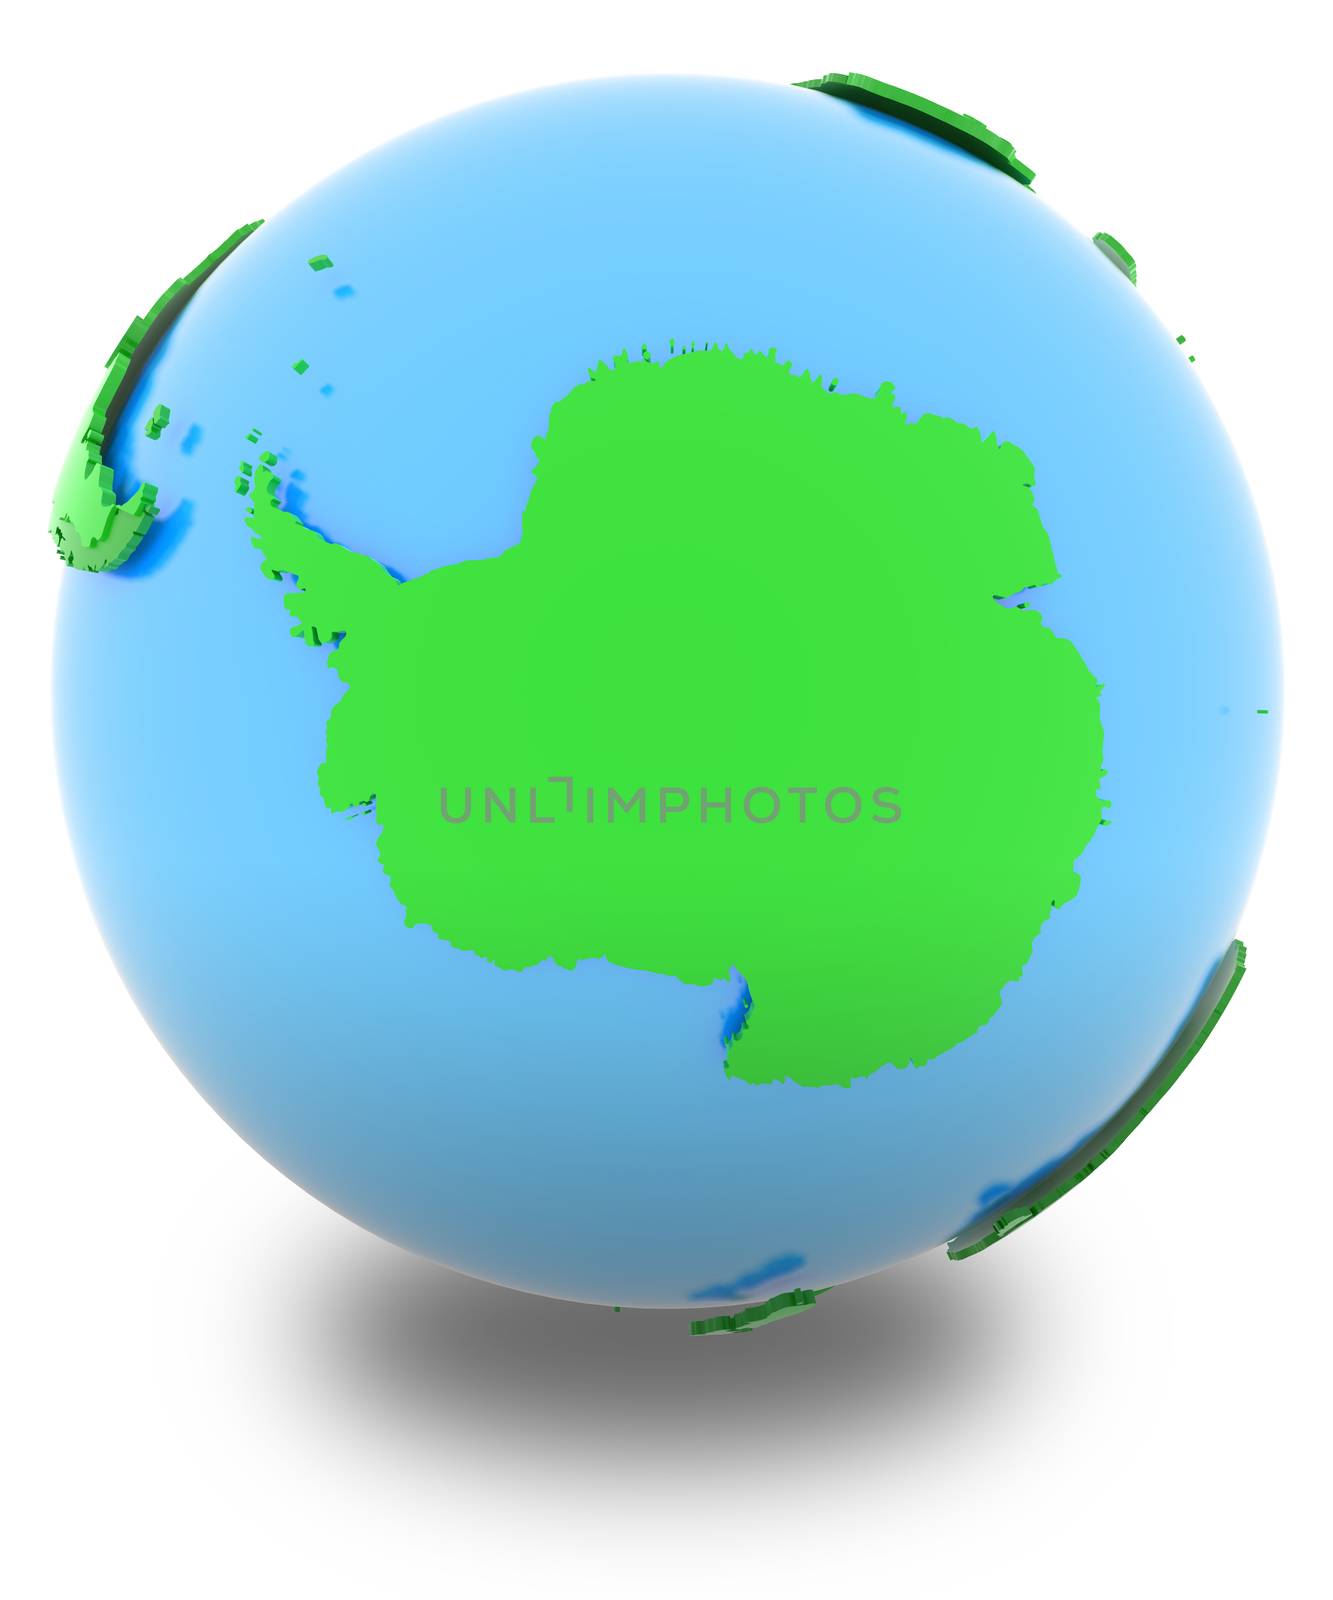 Antarctic, political map of the world in various shades of green.